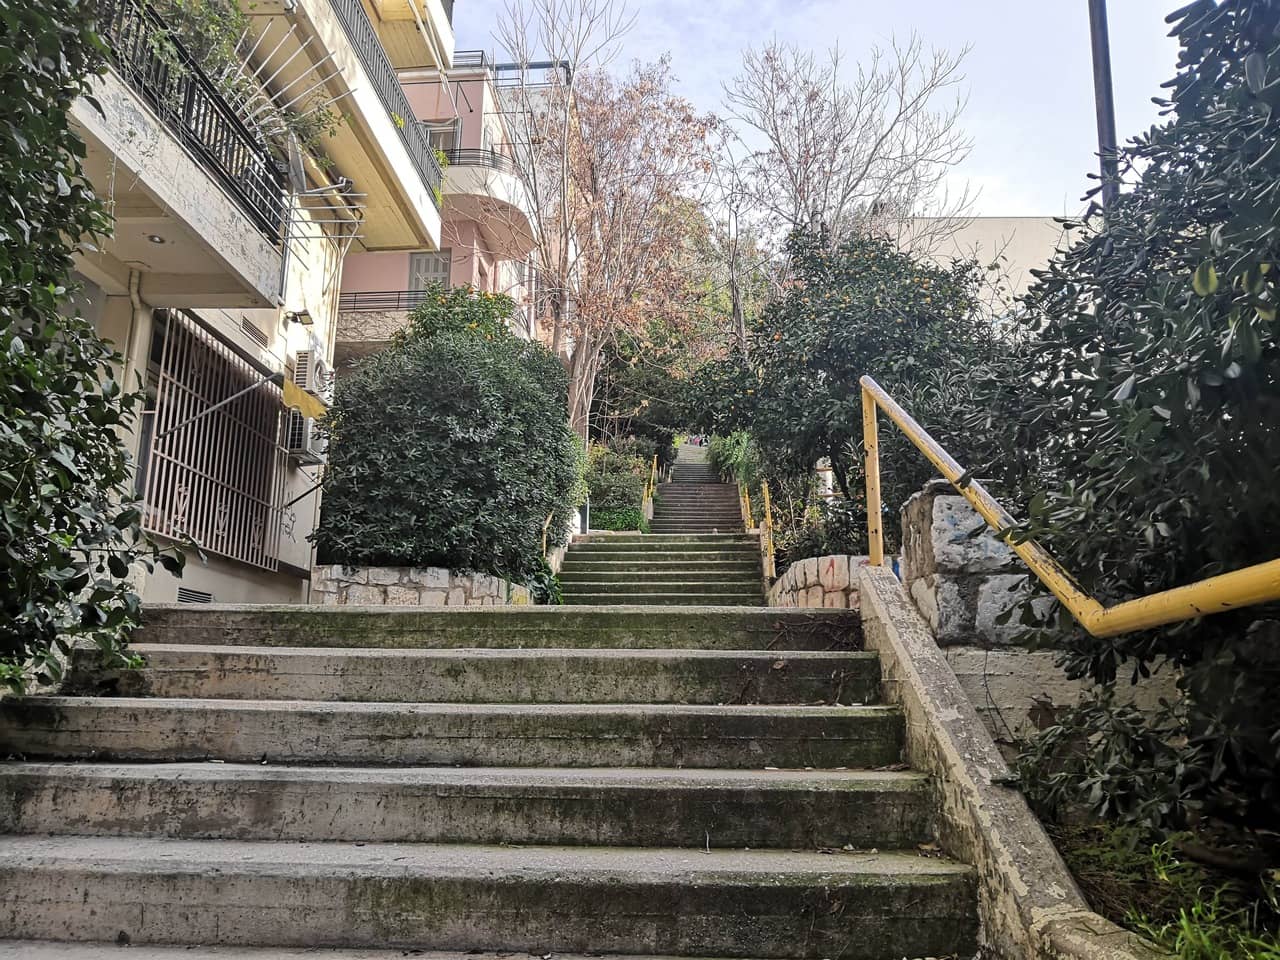 Urban staircase with bushes